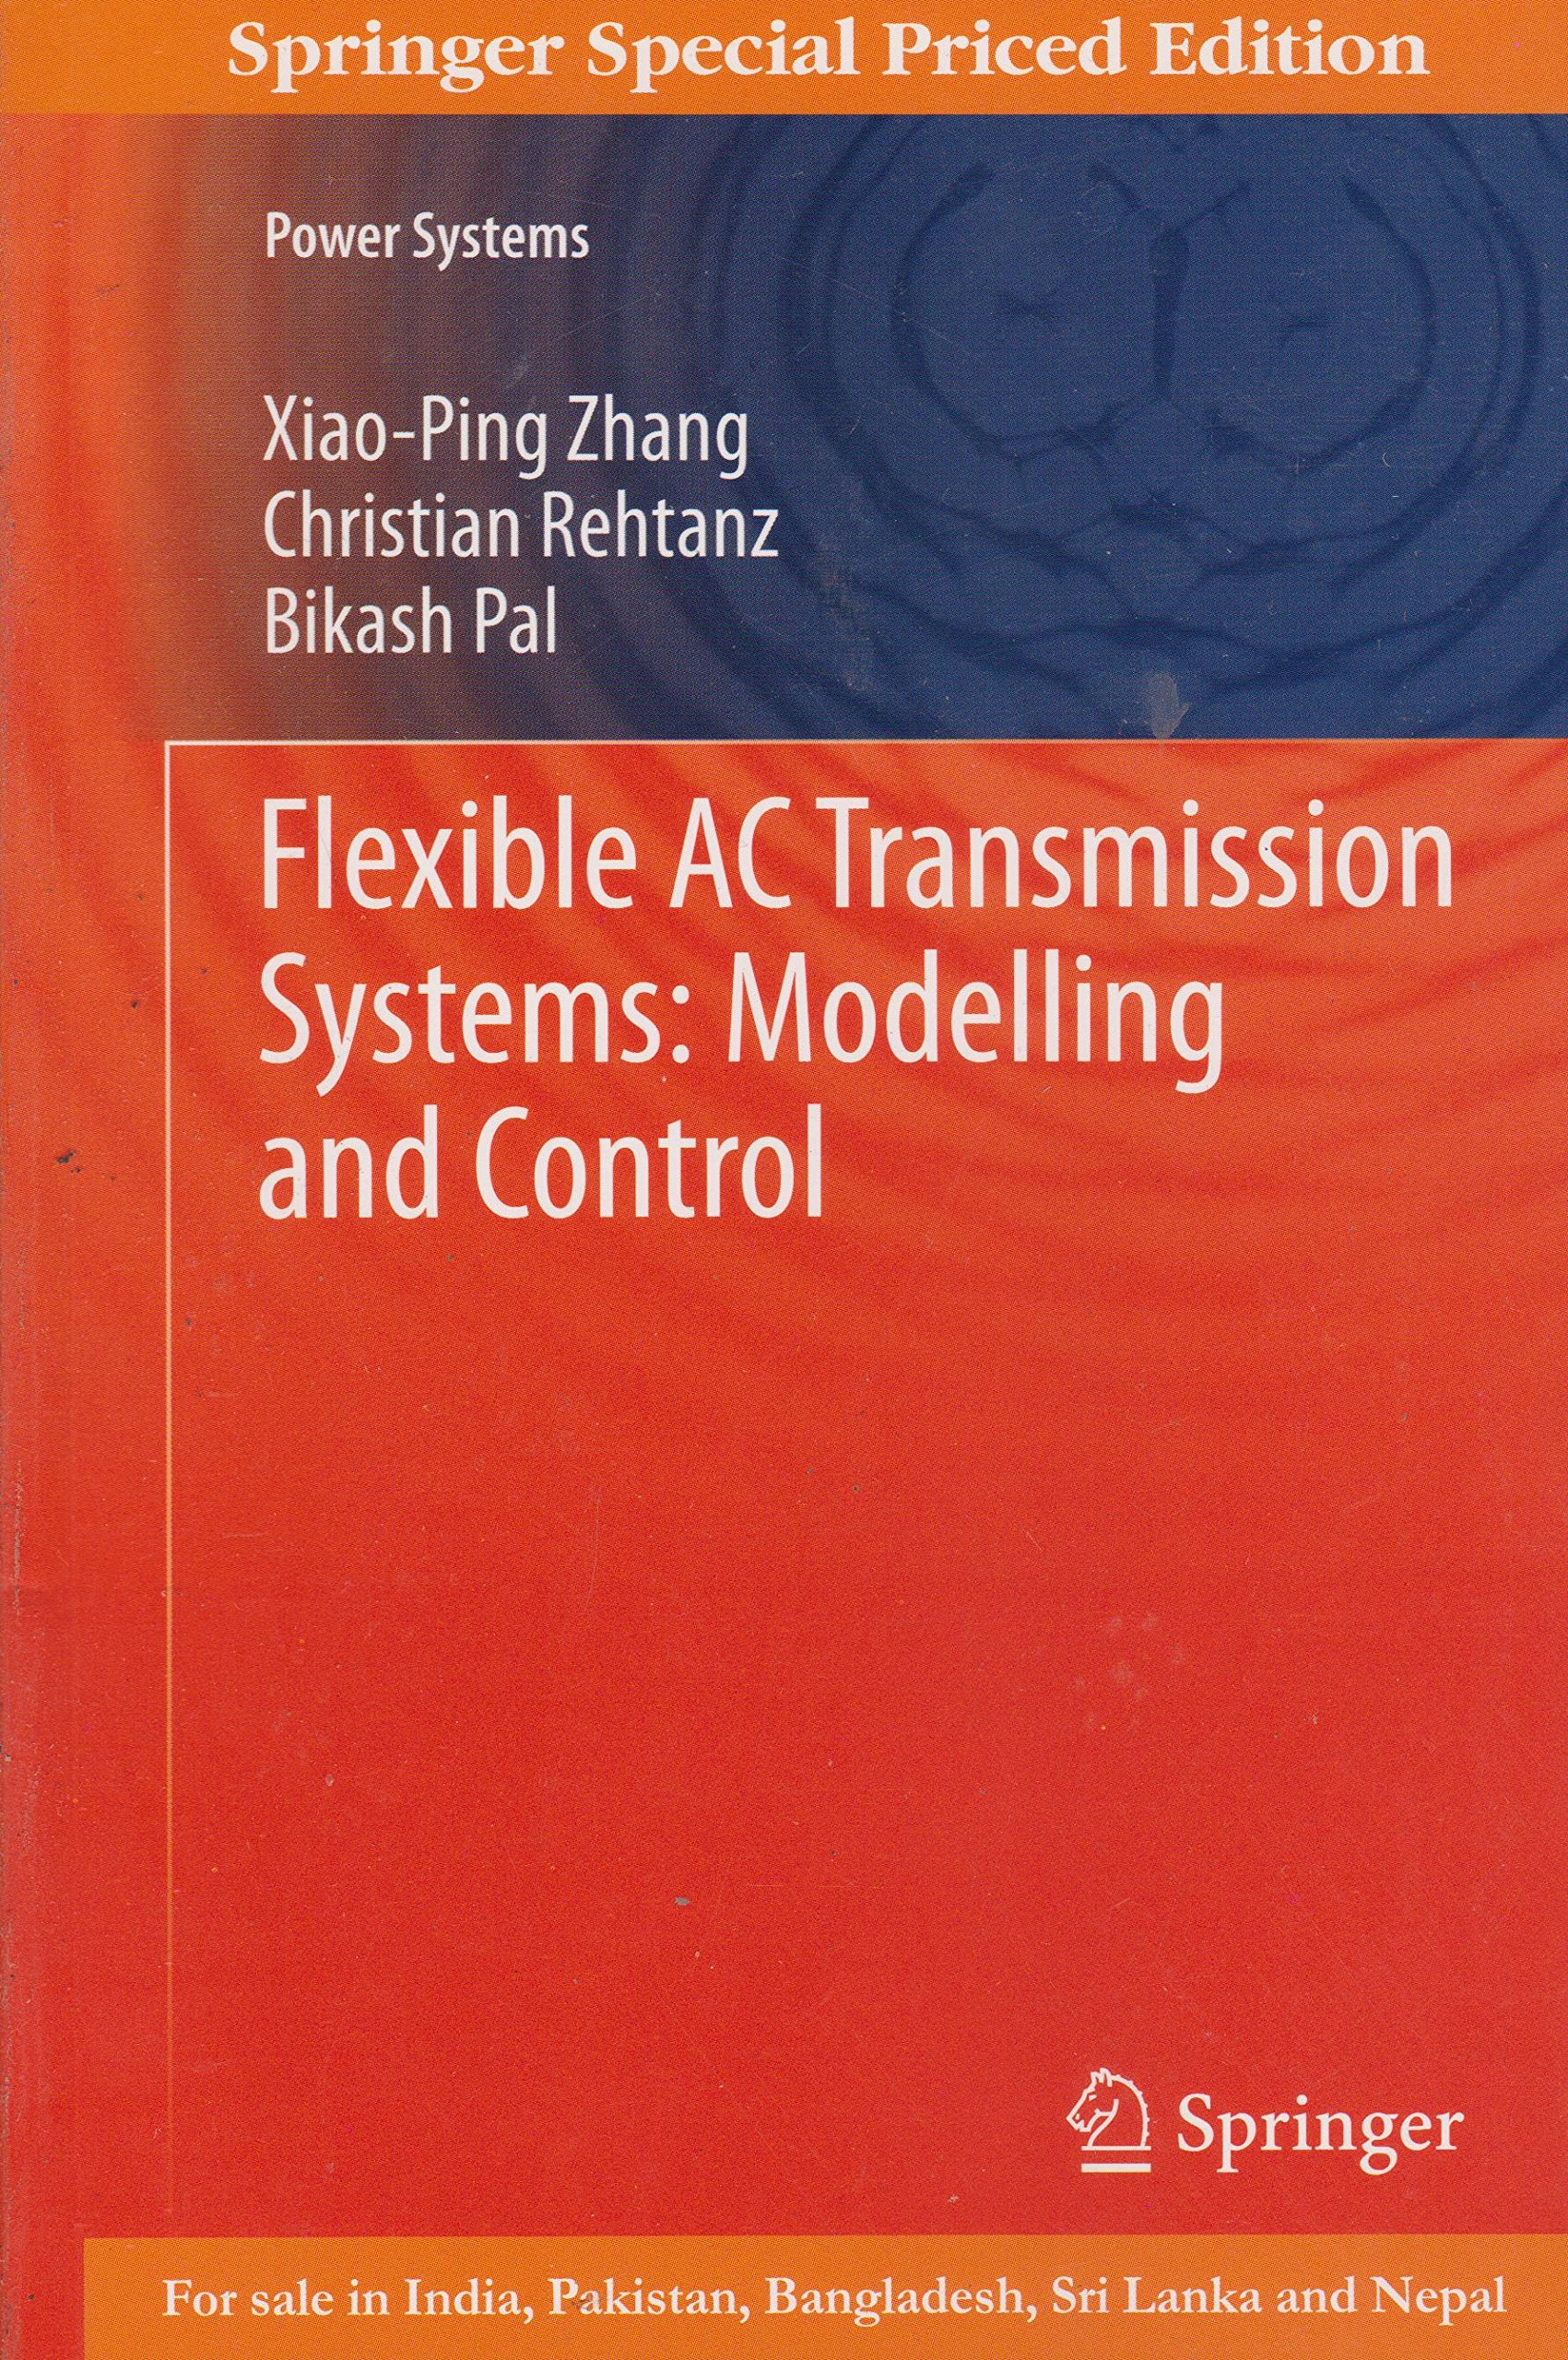 Flexible Ac Transmission Systems: Modeling And Control